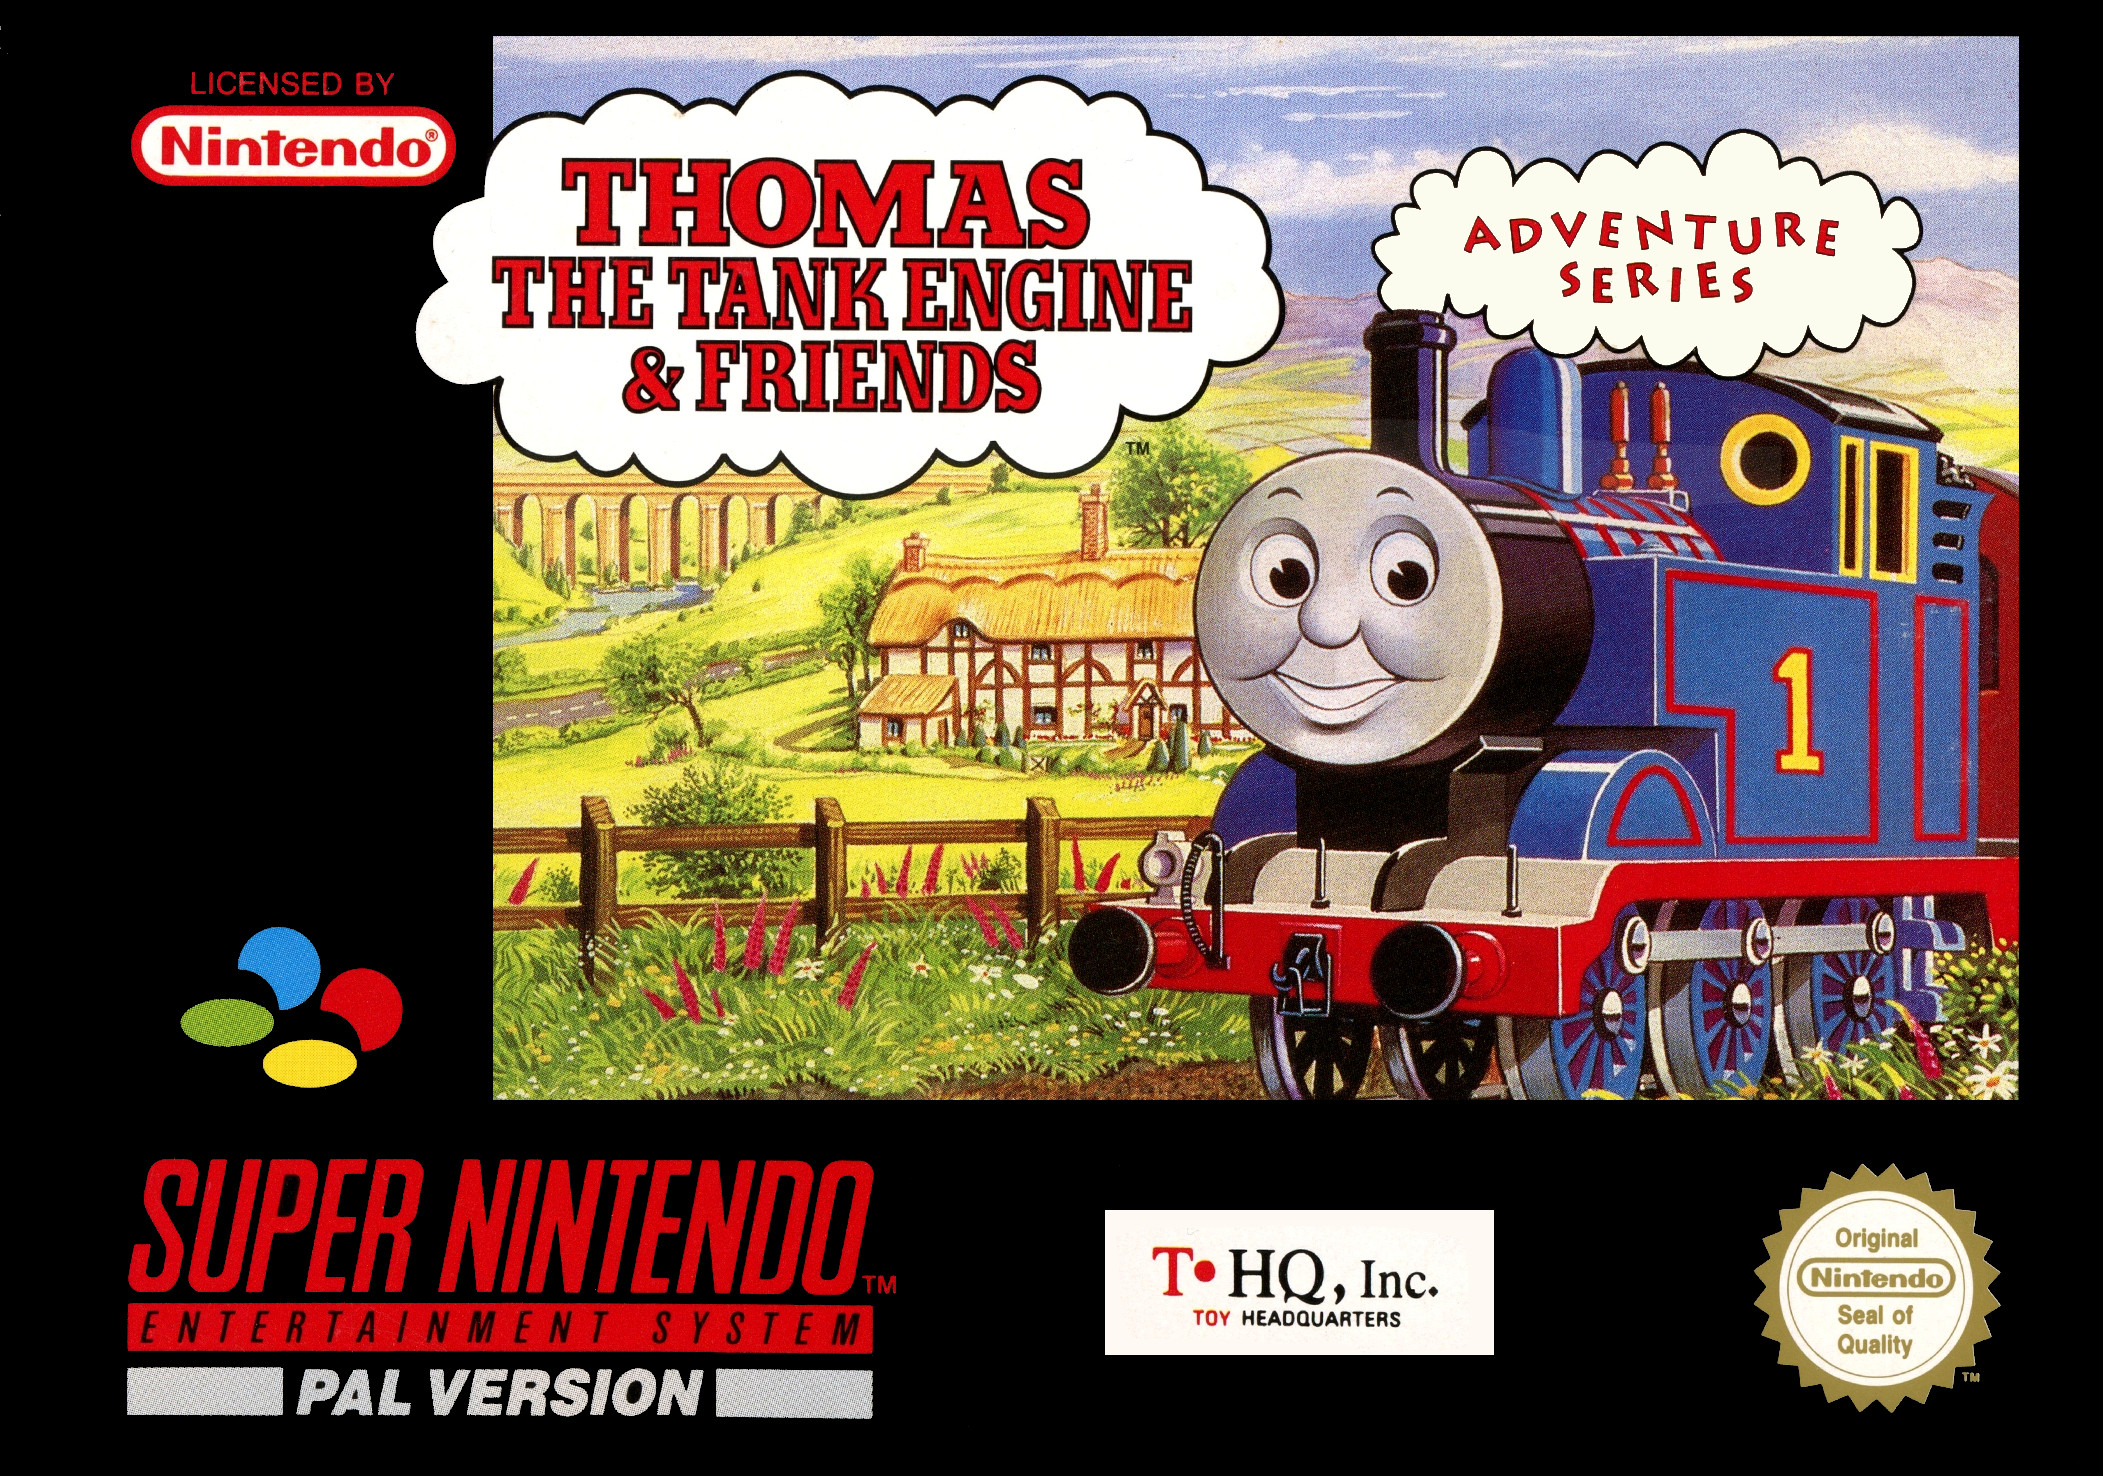 Thomas the Tank Engine & Friends | GameLibrary